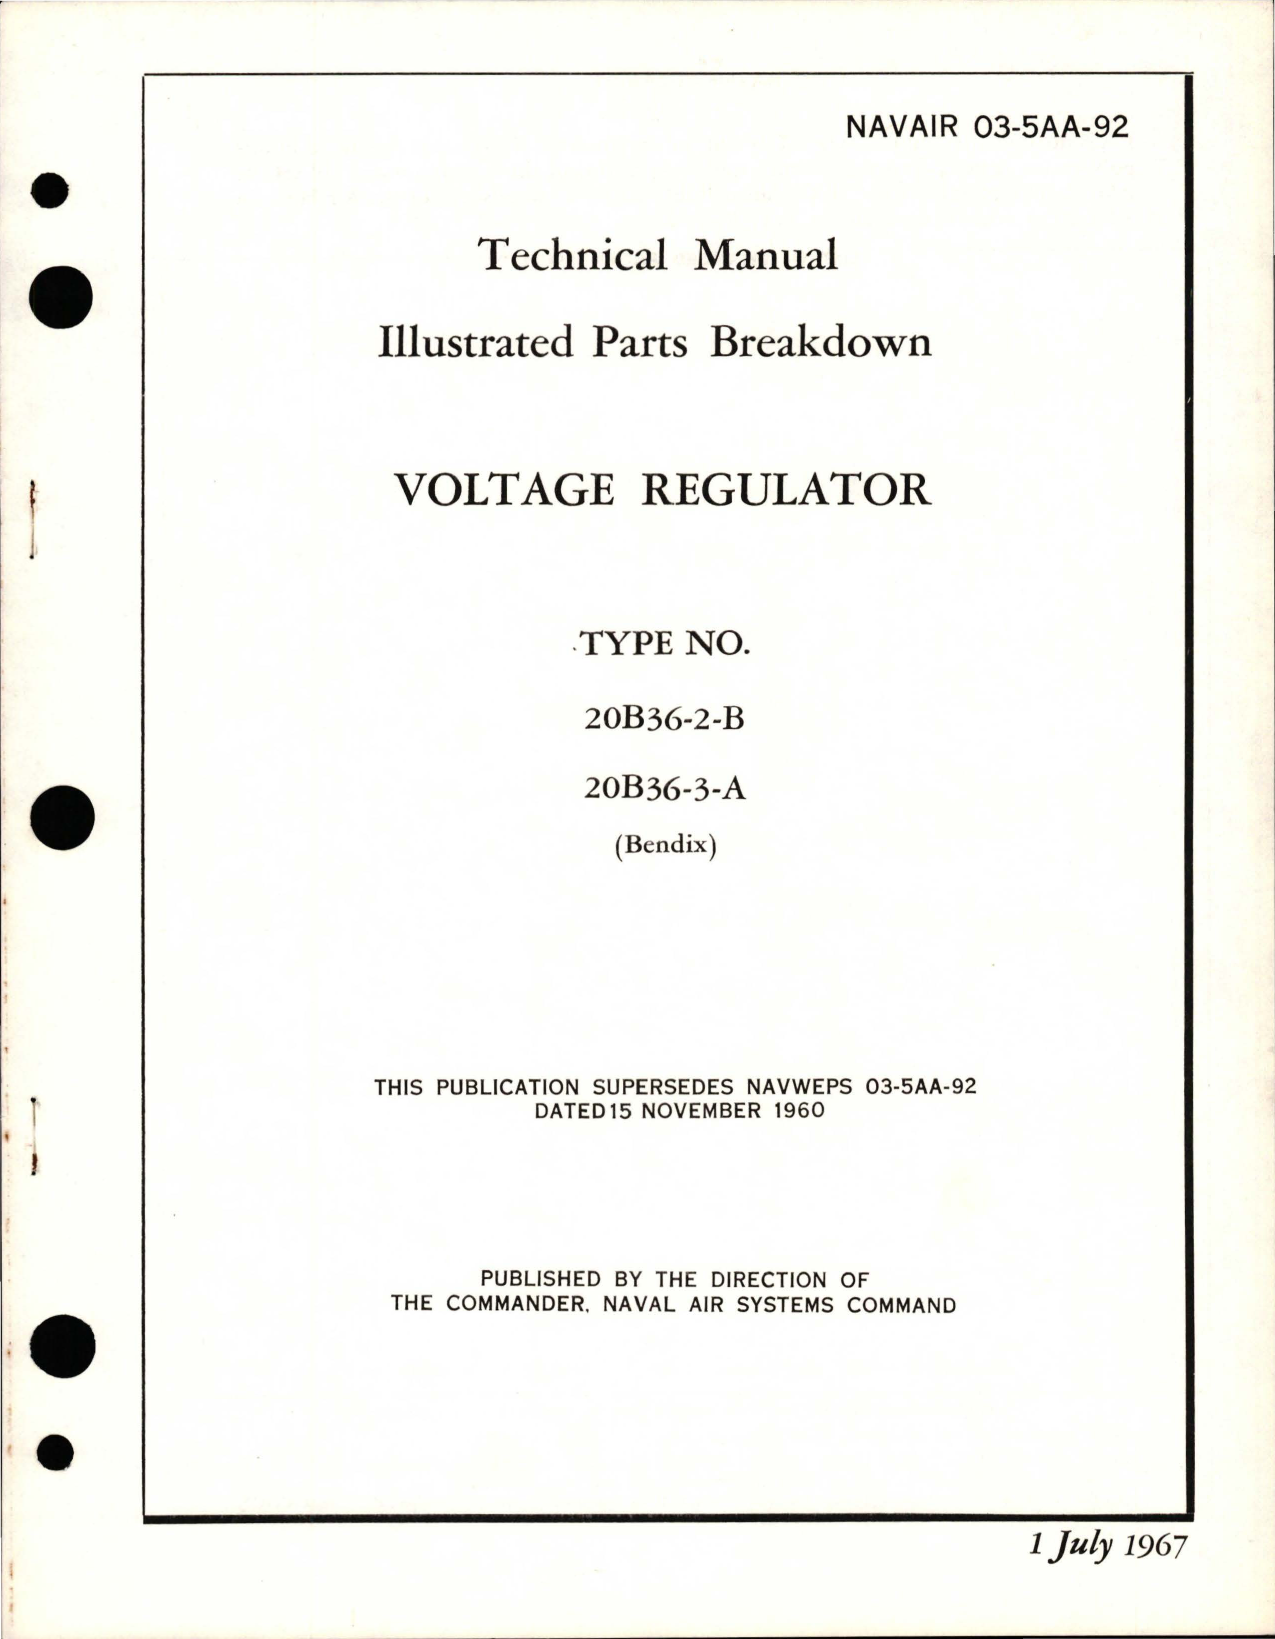 Sample page 1 from AirCorps Library document: Illustrated Parts Breakdown for Voltage Regulator - Type 20B36-2-B, 20B36-3-A